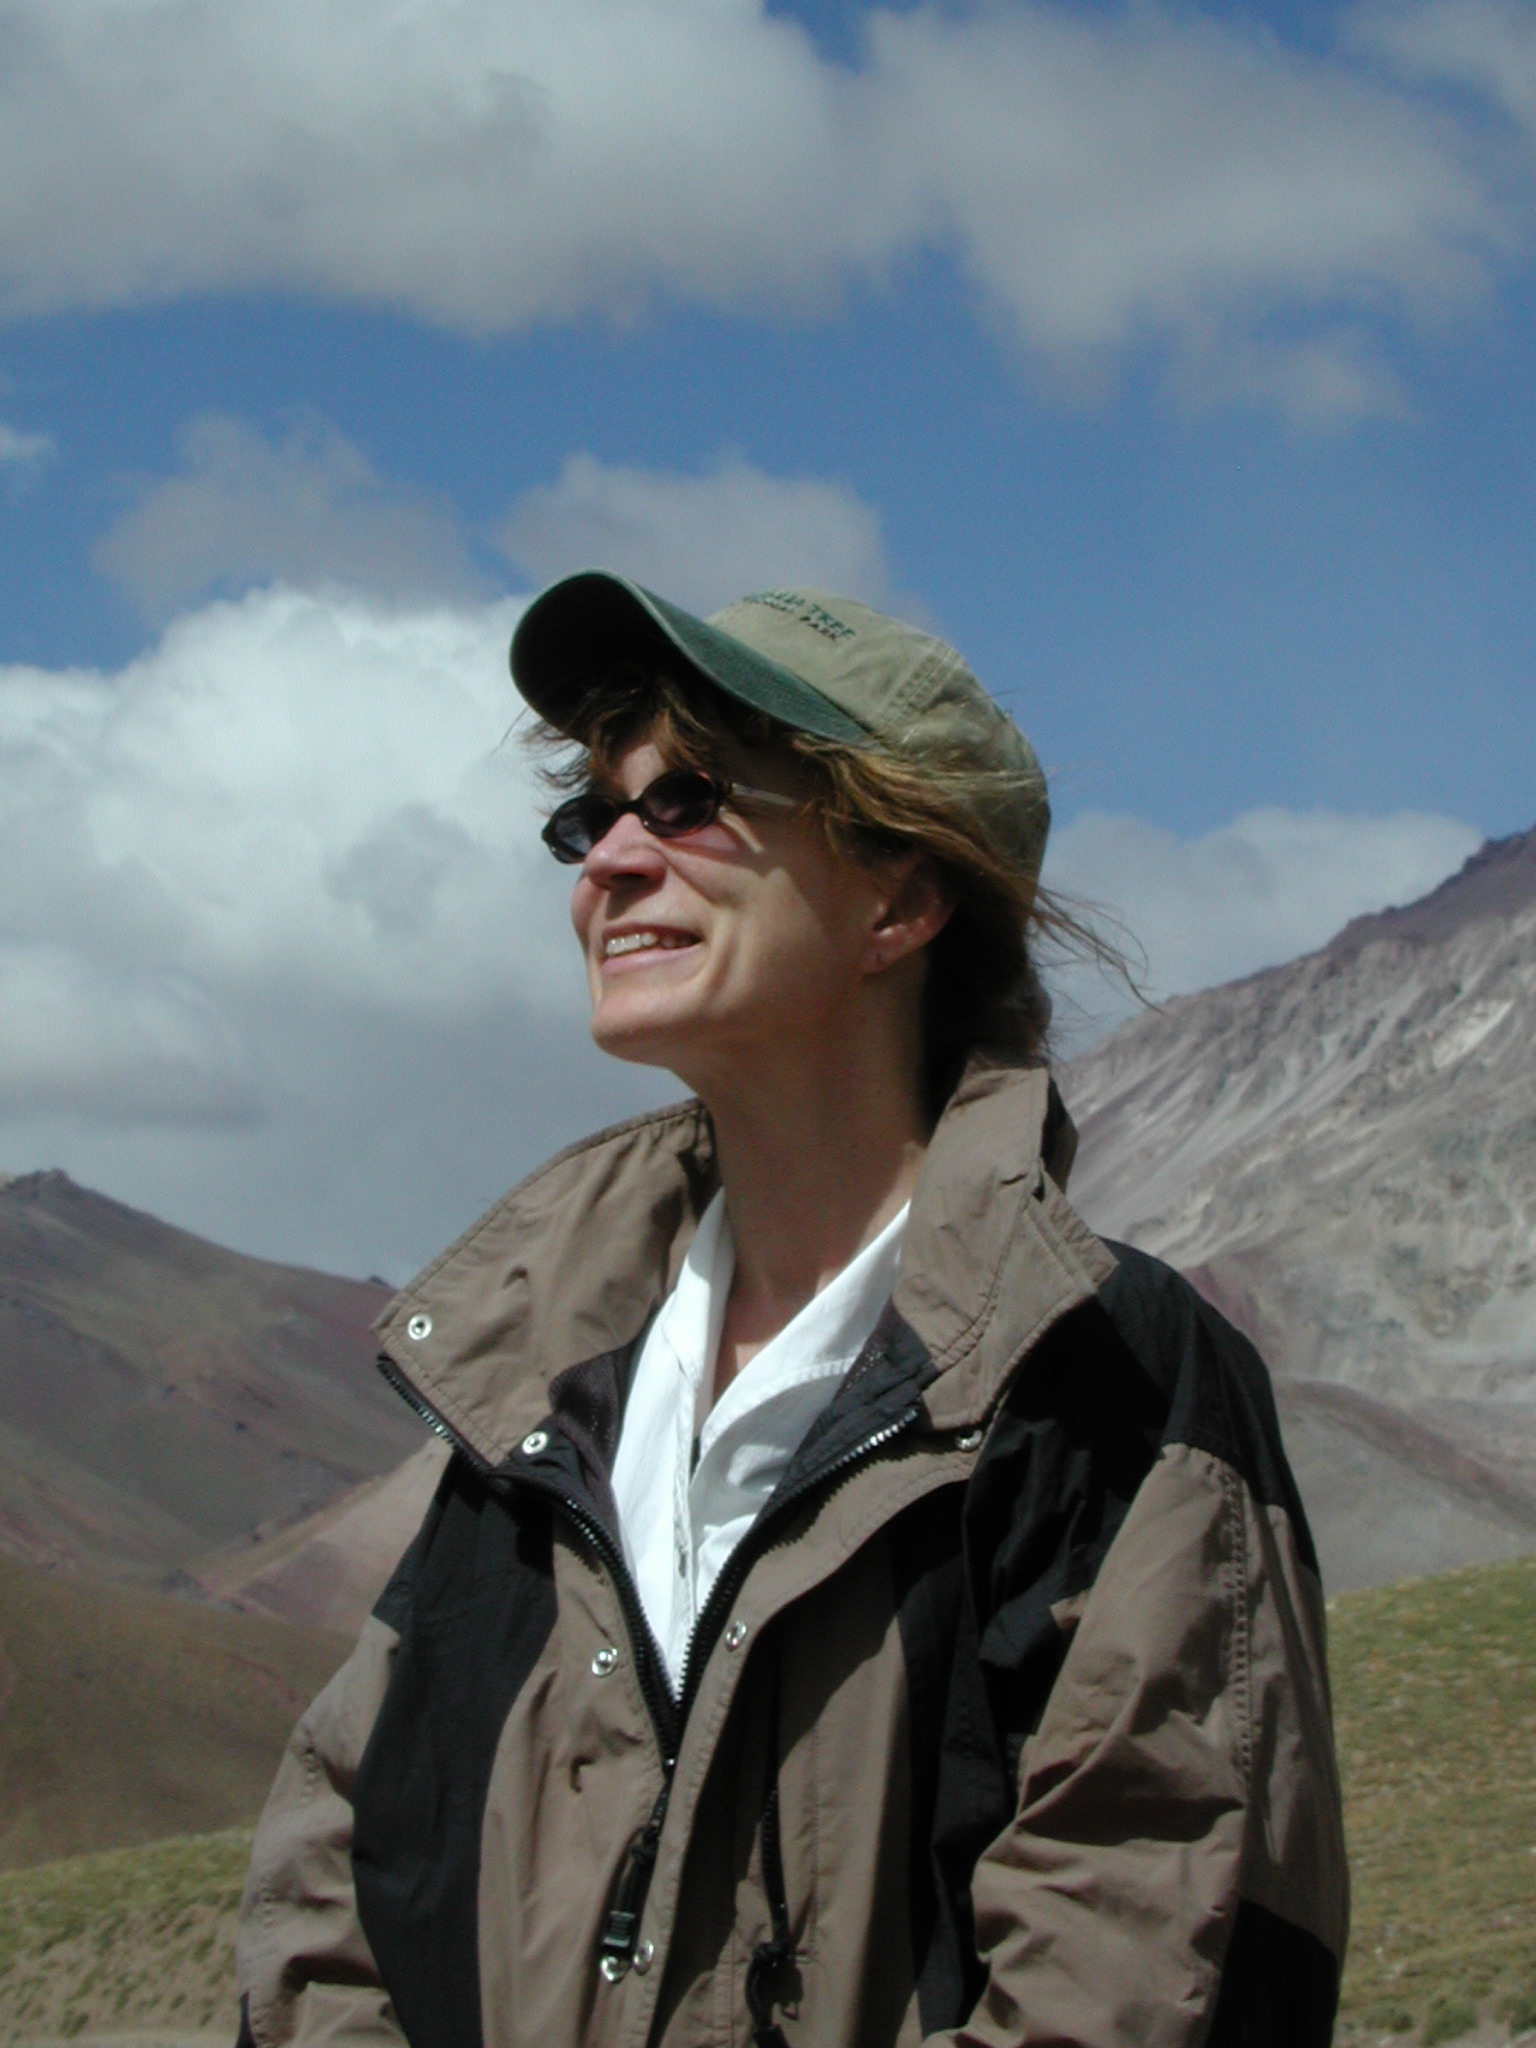 Sherilyn Fritz, George Holmes Professor of Earth and Atmospheric Sciences and Biological Sciences